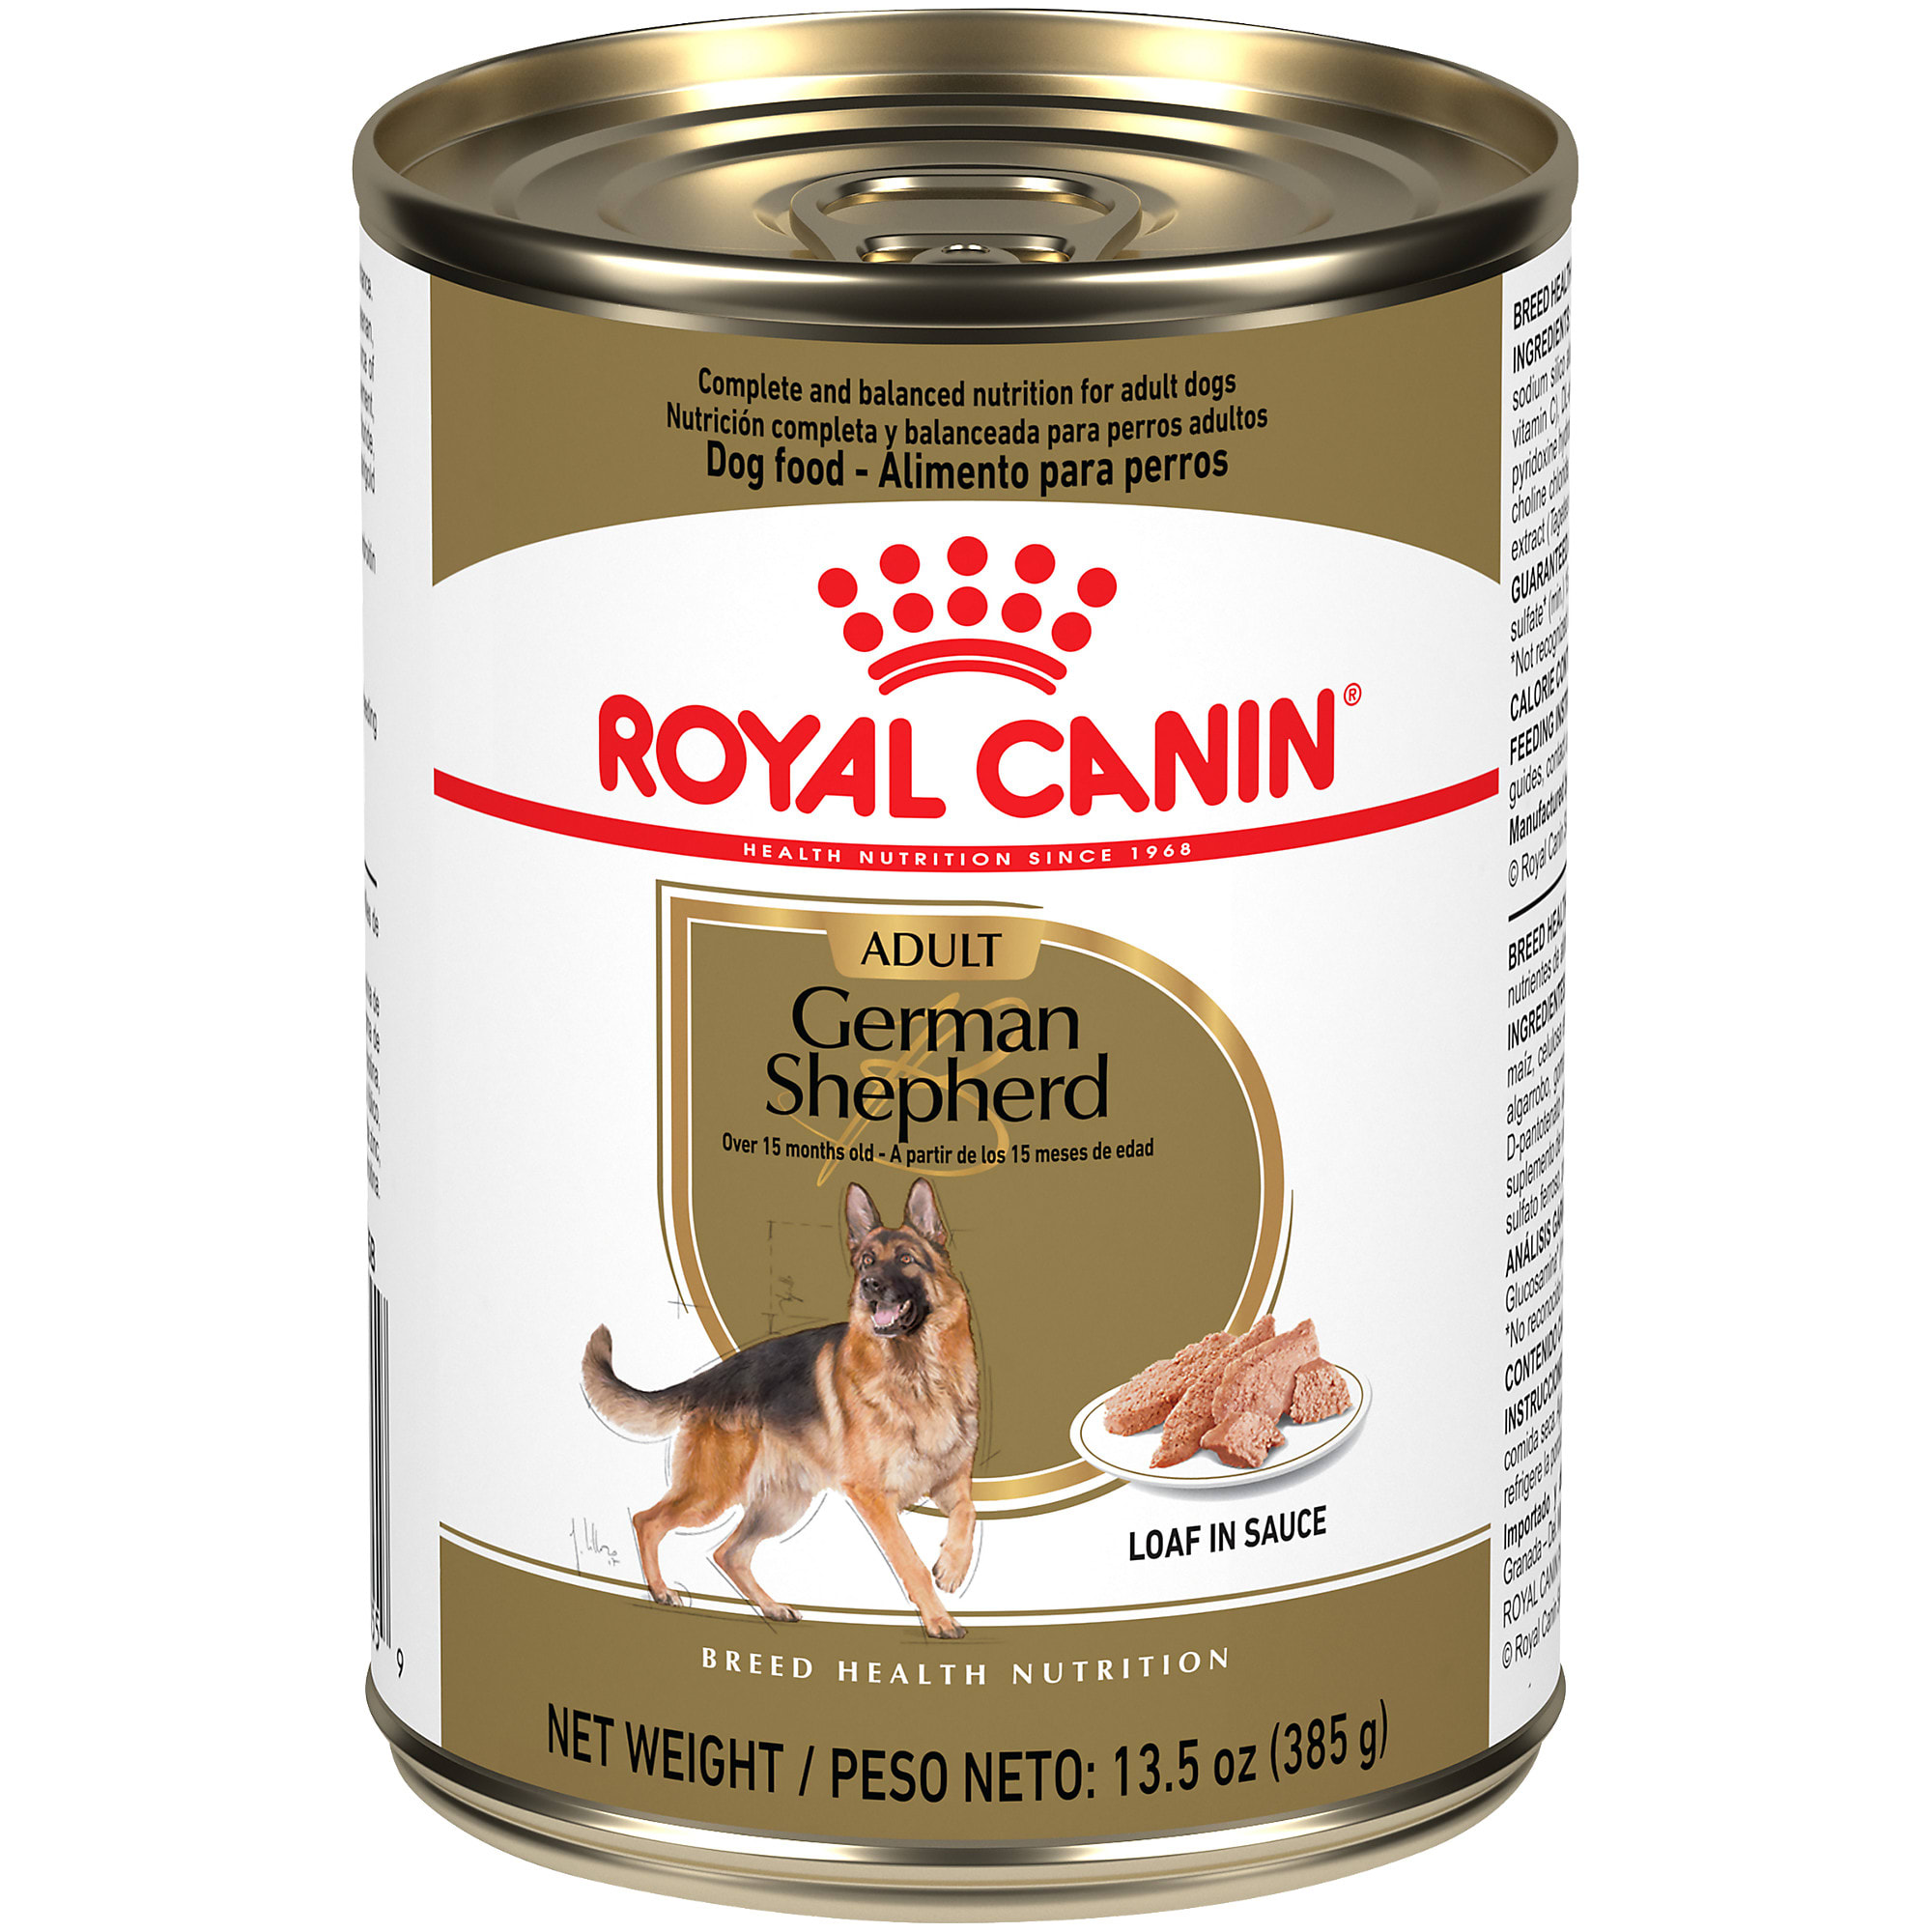 Best Dog Food for German Shepherds With Skin Allergies: A Complete Guide